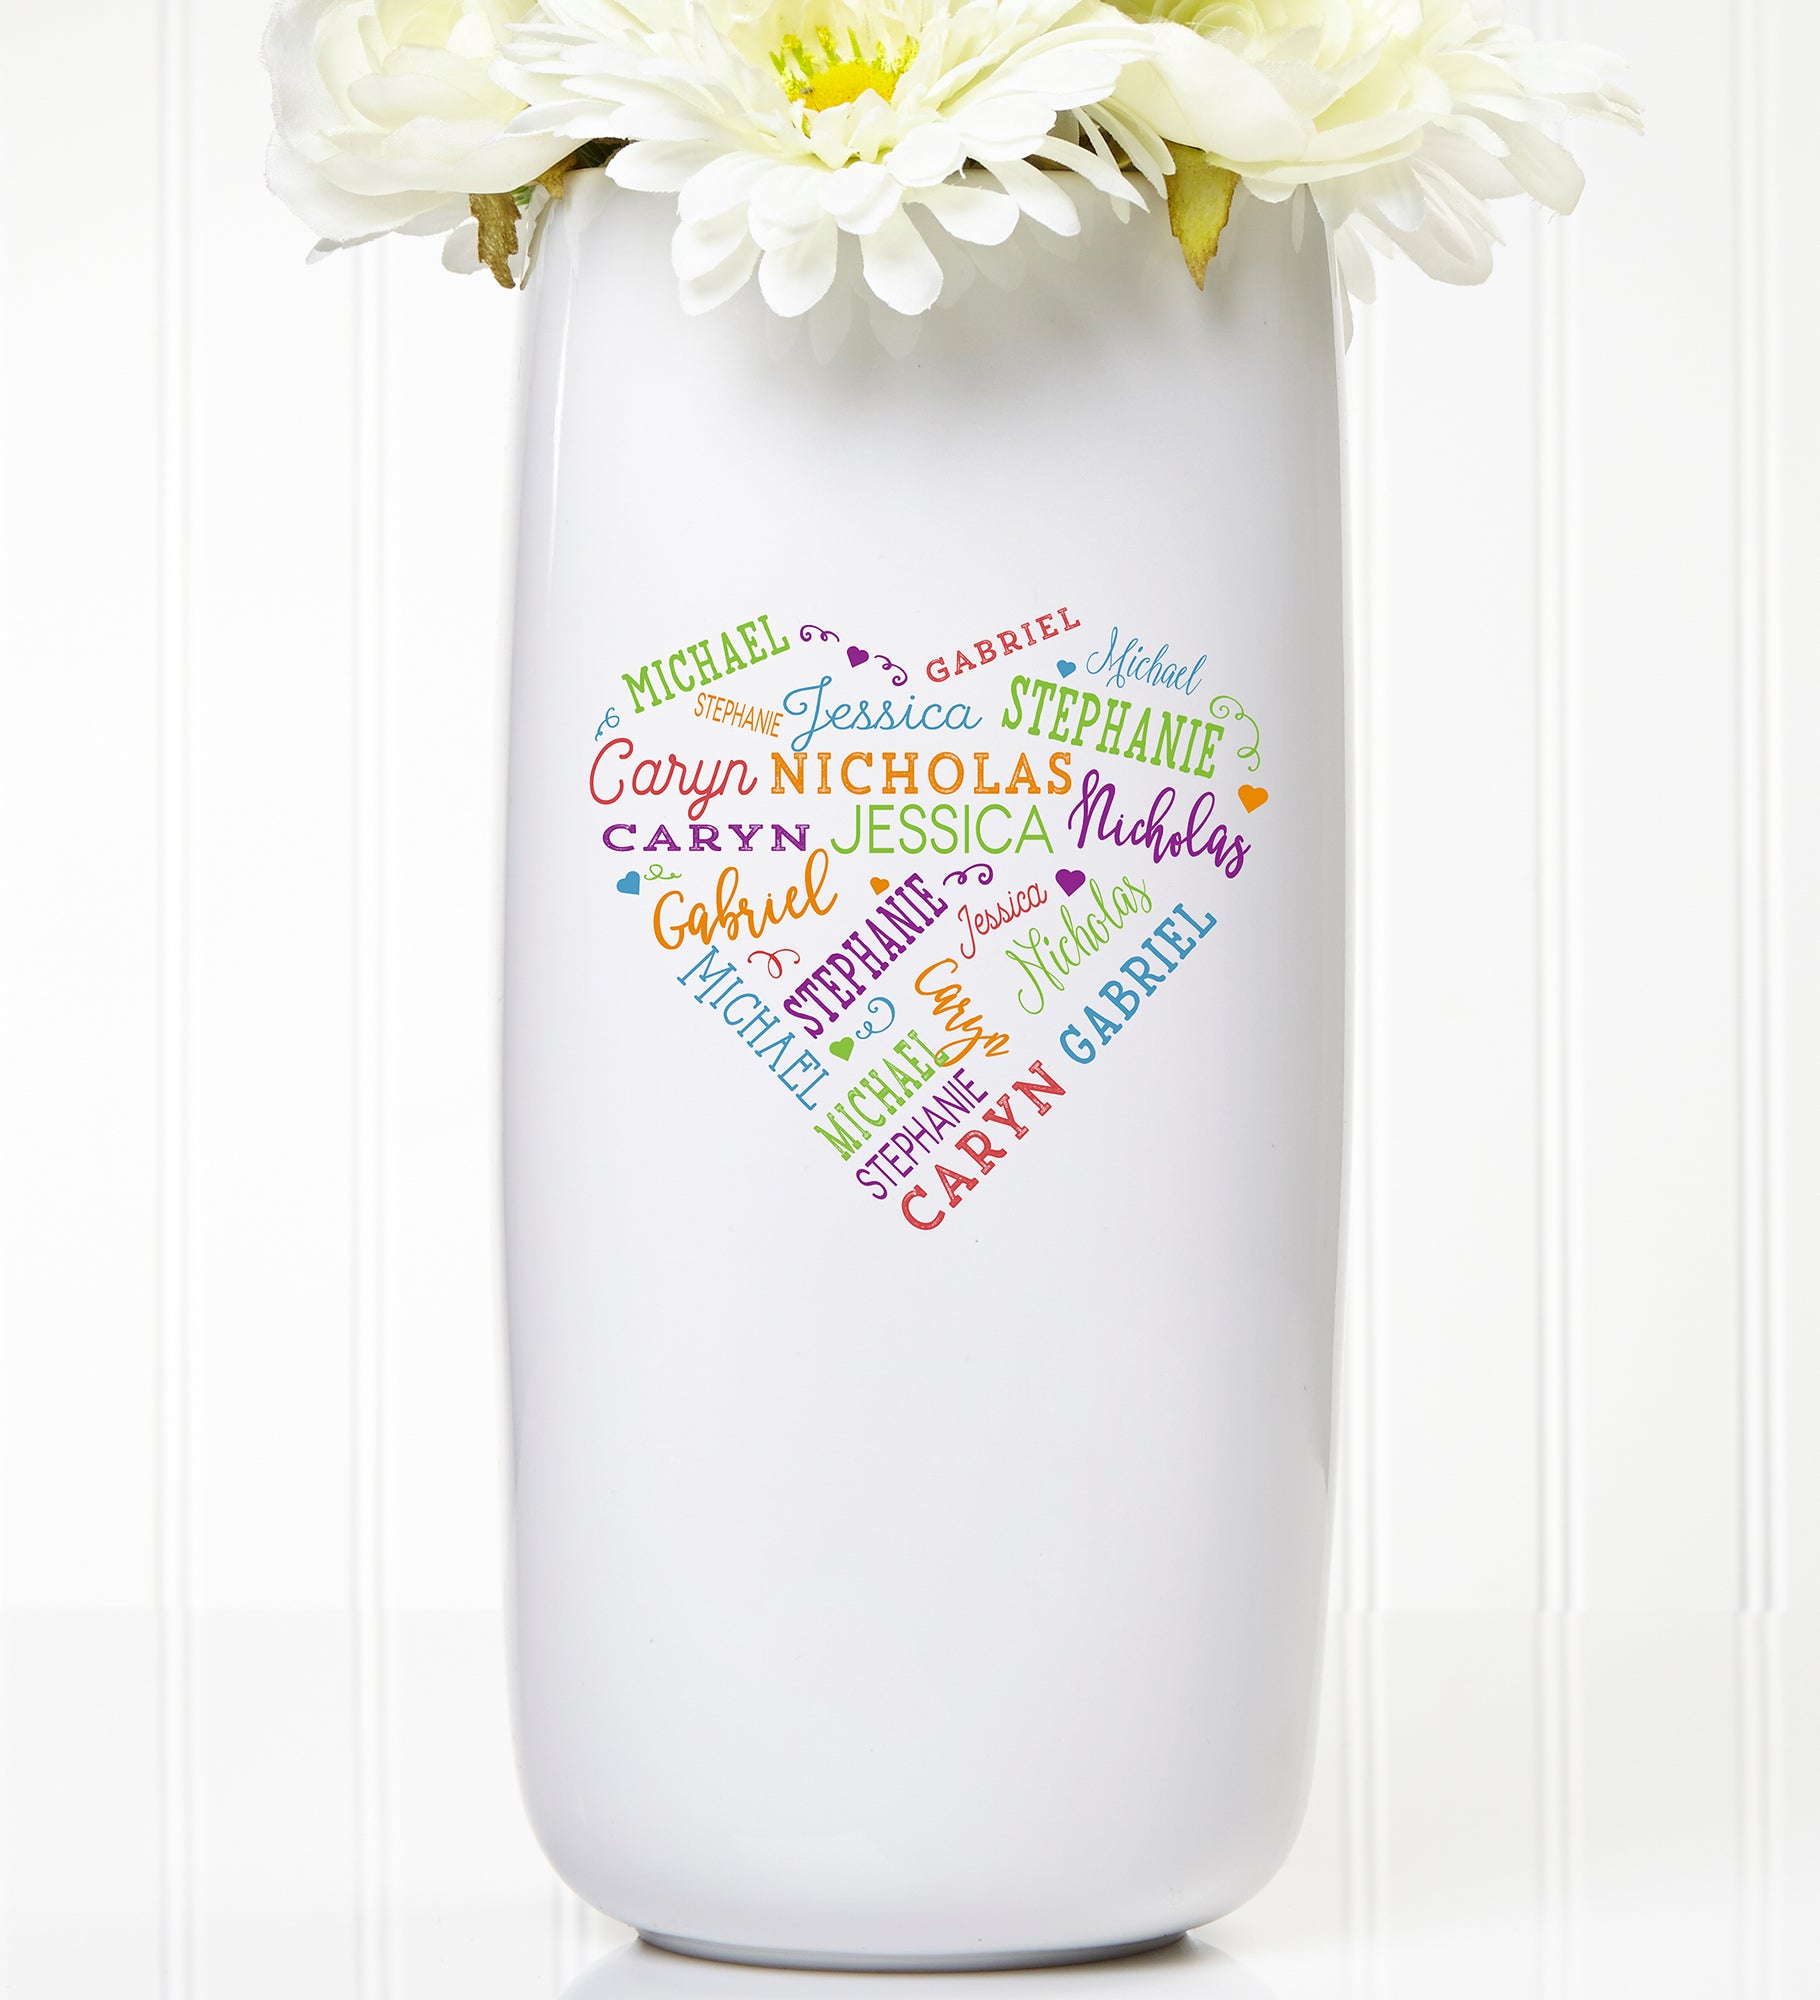 Close To Her Heart Personalized Ceramic Vase